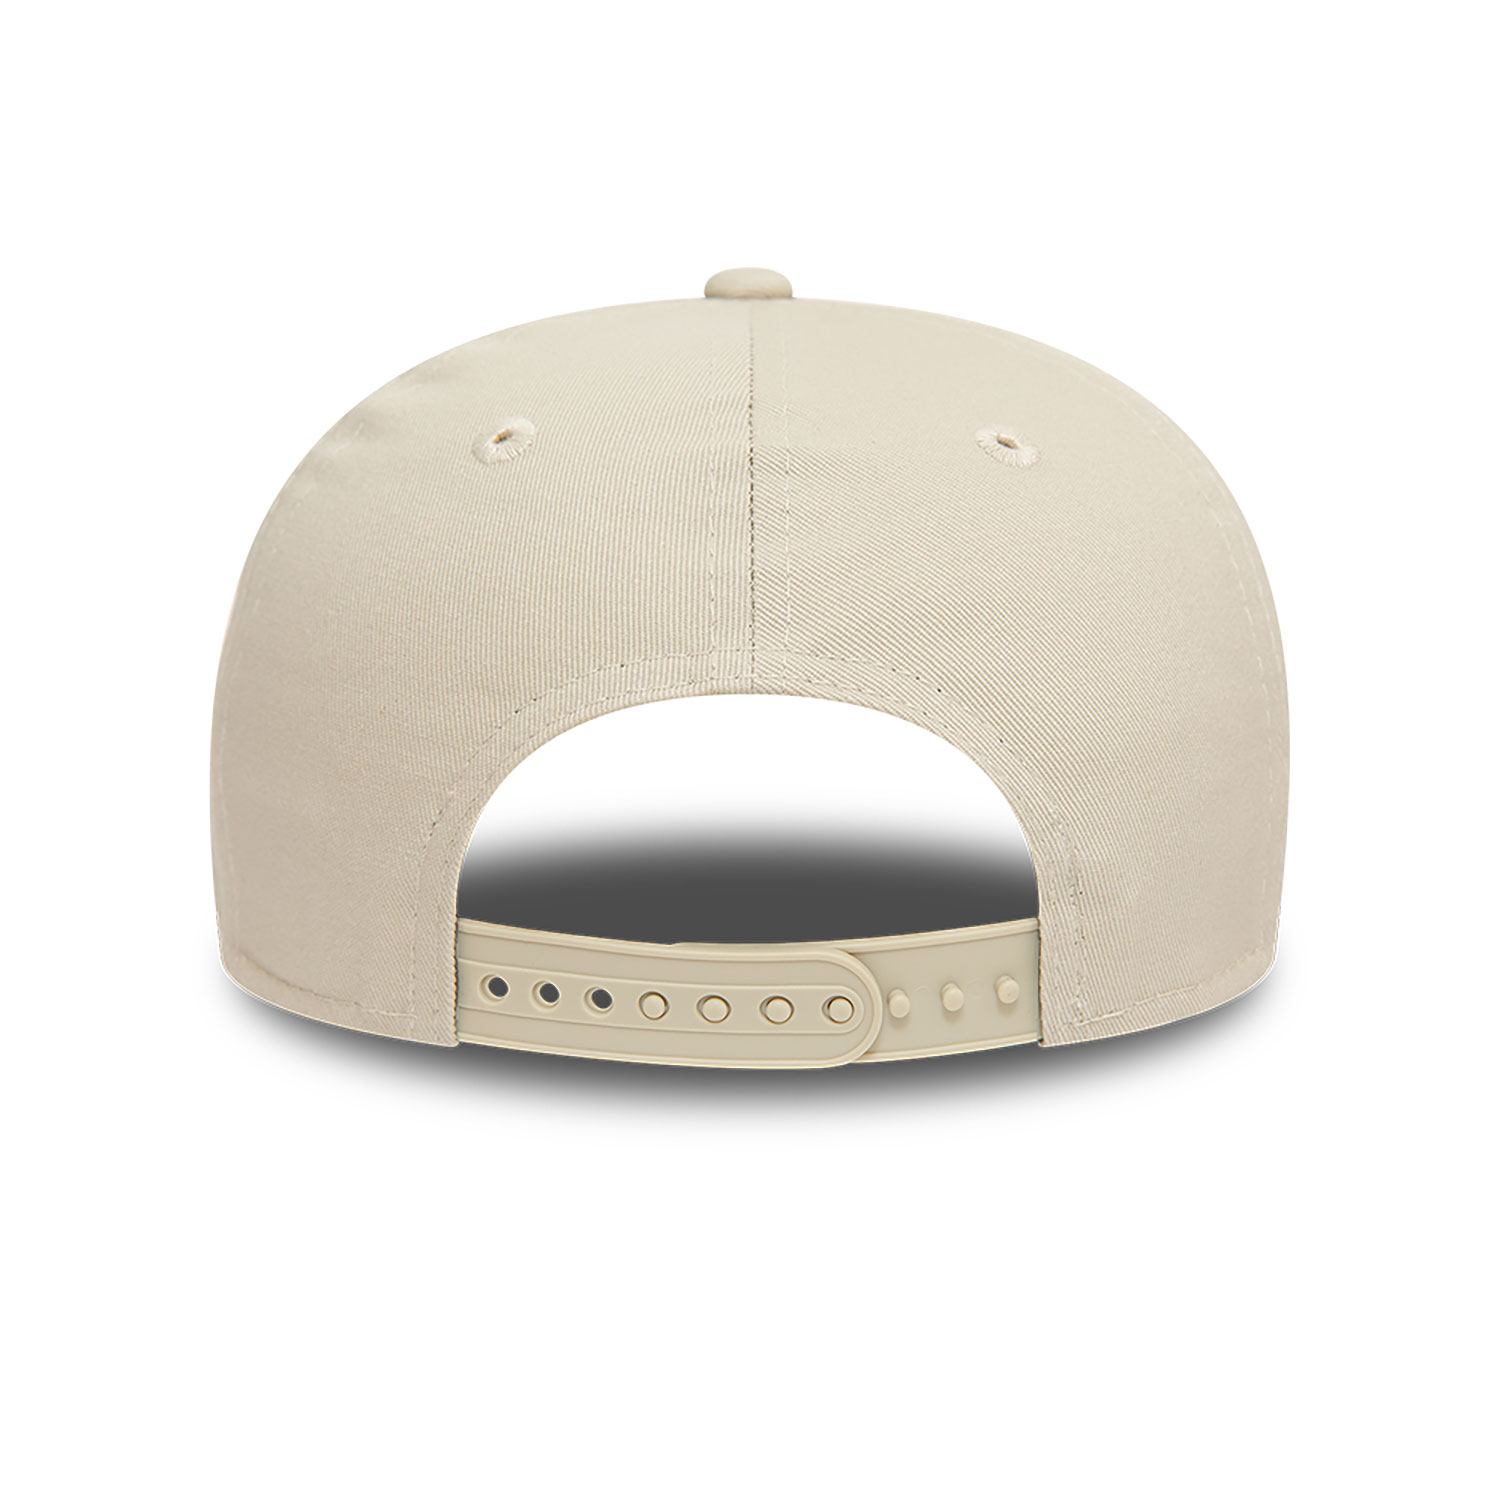 French Federation Of Rugby Stone 9FIFTY Snapback Cap